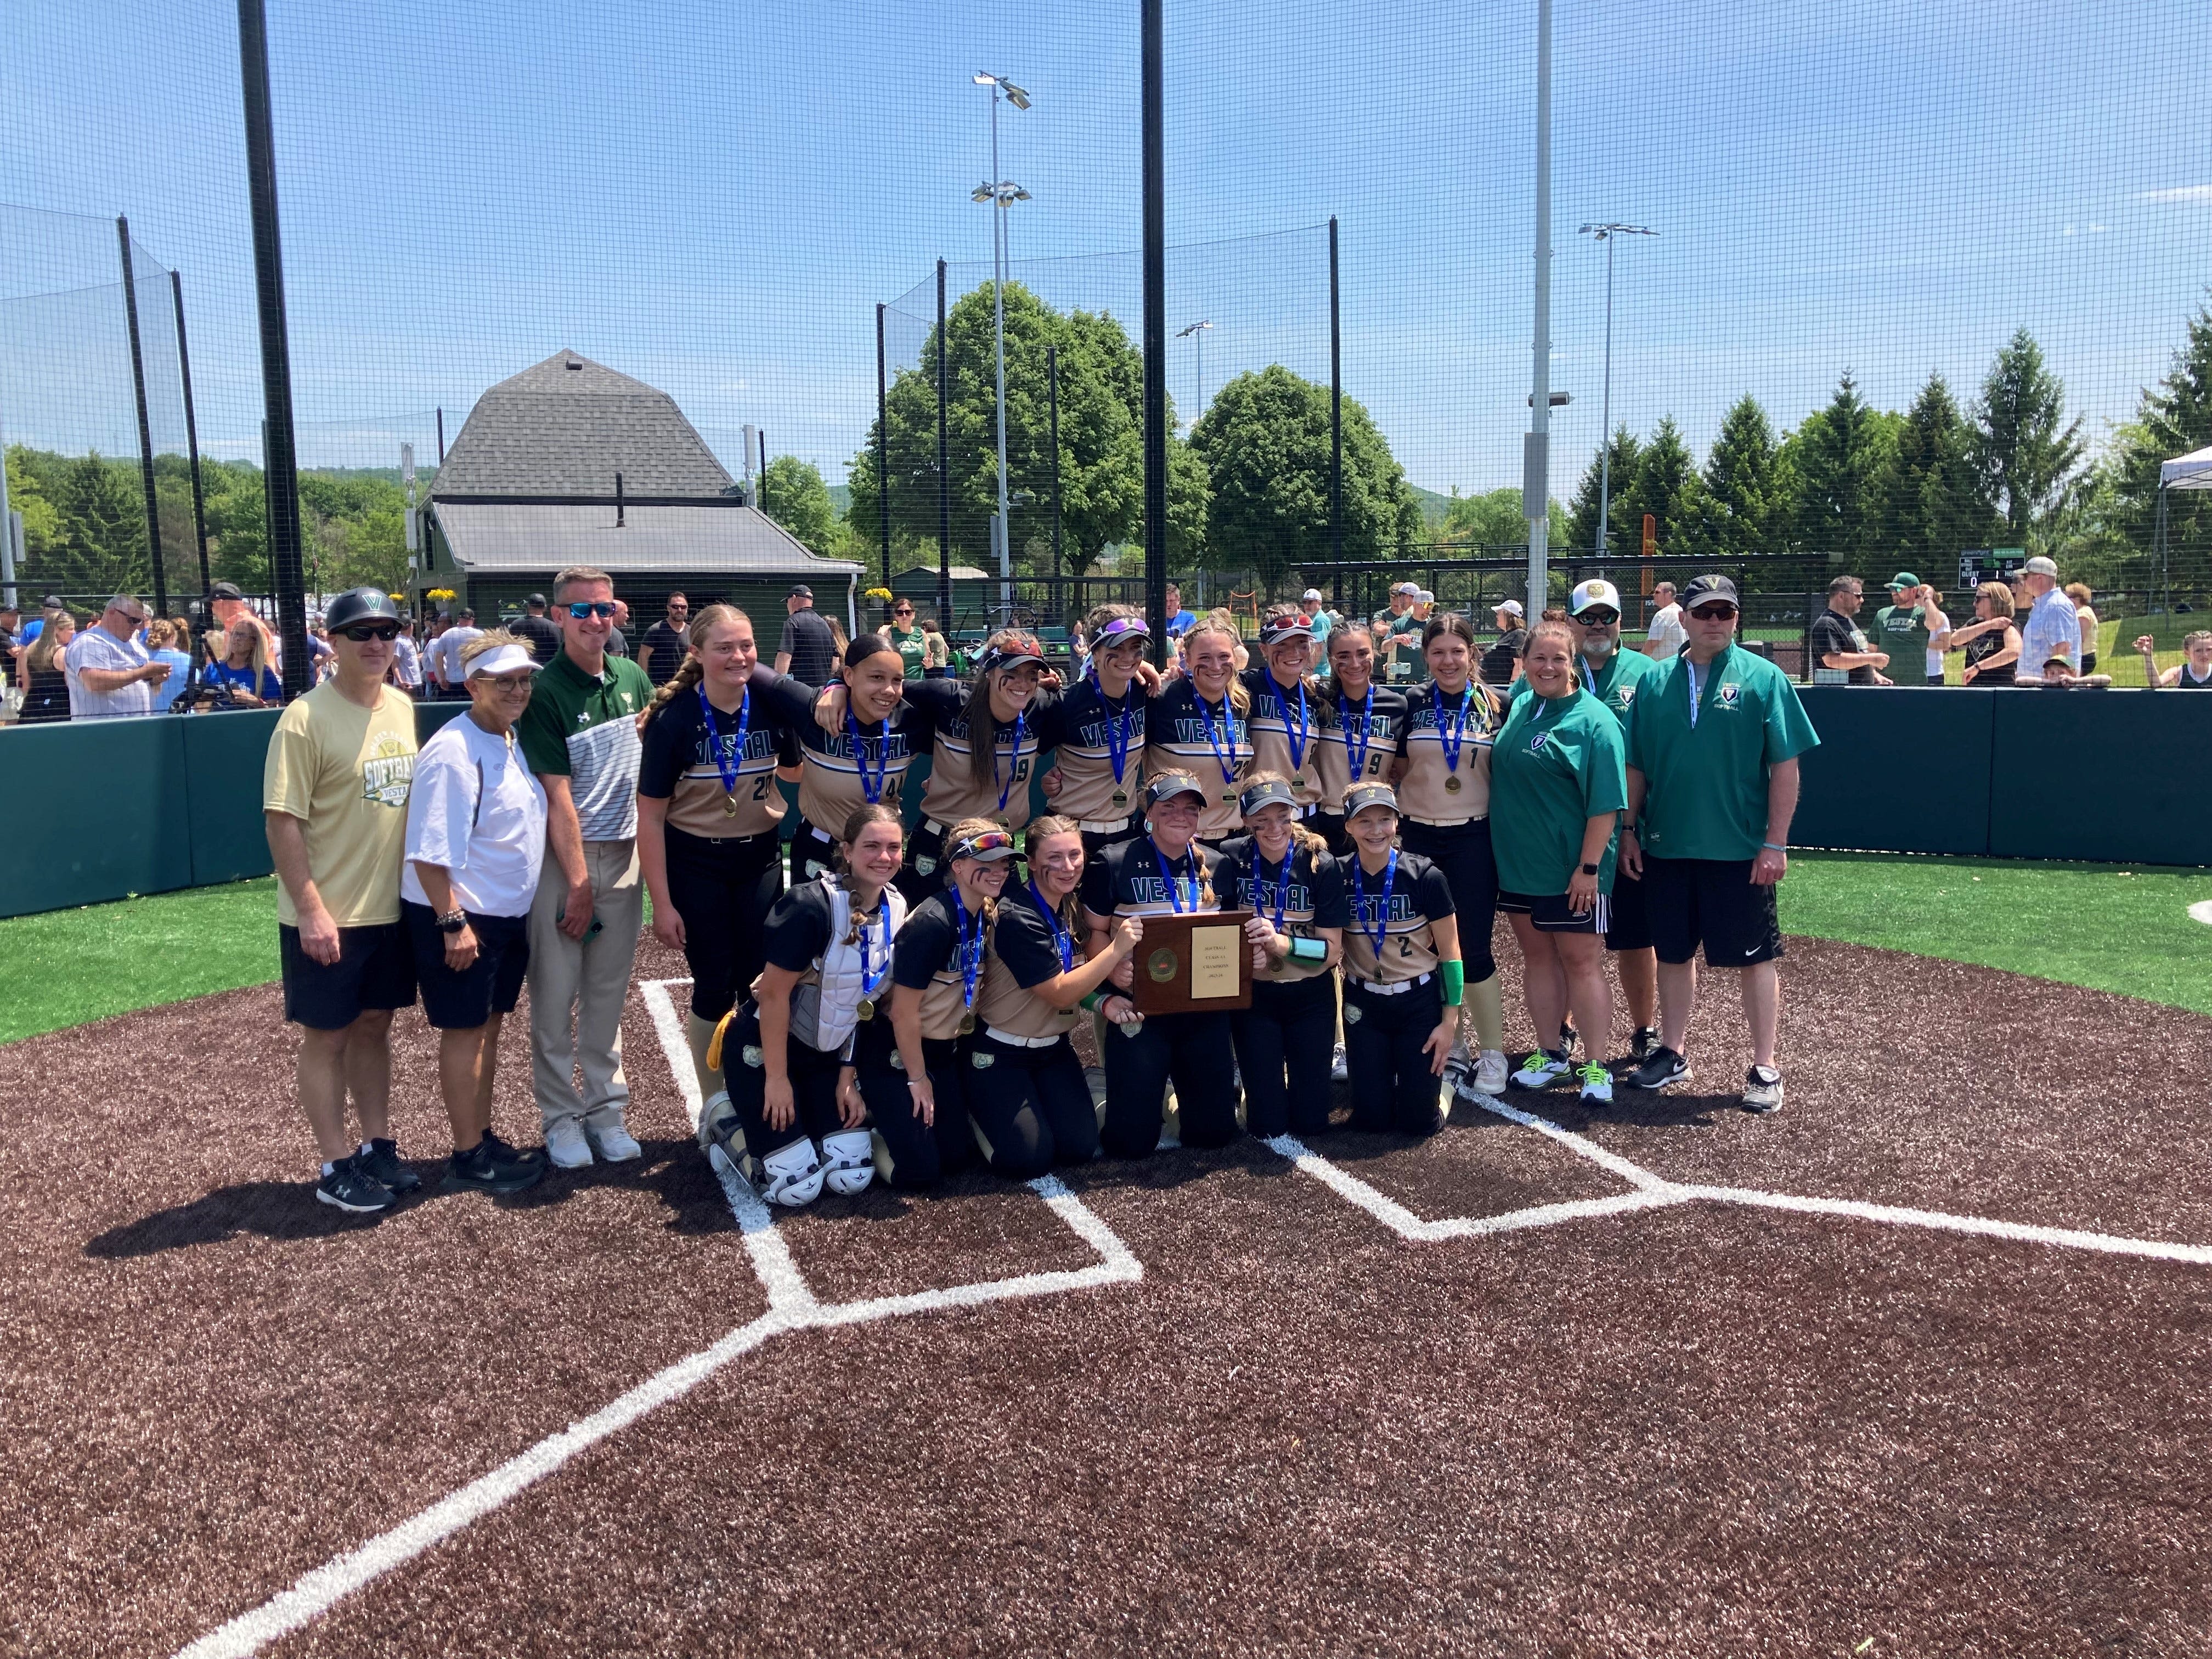 Vestal gets sound pitching to top Horseheads, 5-0, and secure Section 4 AA softball title